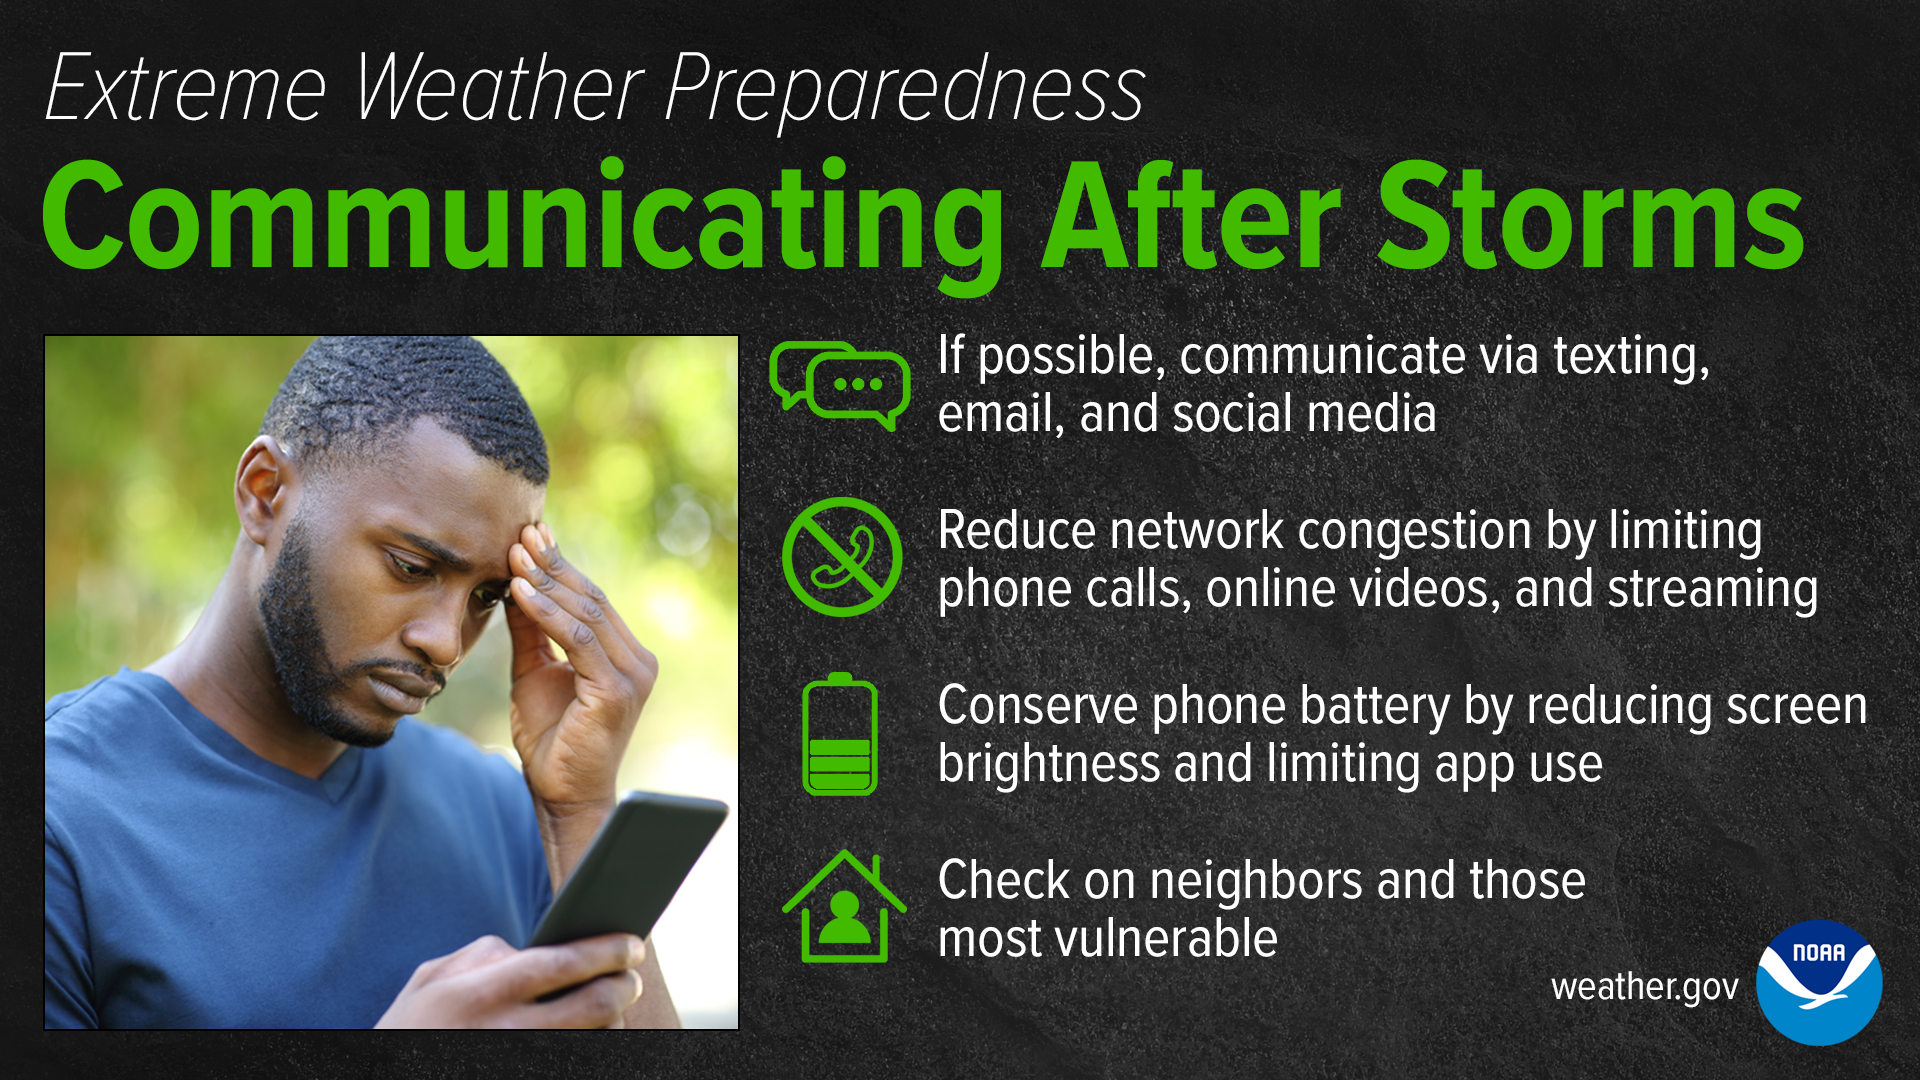 Extreme Weather Preparedness: Communicating After Storms. If possible, communicate via texting, email, and social media. Reduce network congestion by limiting phone calls, online videos, and streaming. Conserve phone battery by reducing screen brightness and limiting app use. Check on neighbors and those most vulnerable.